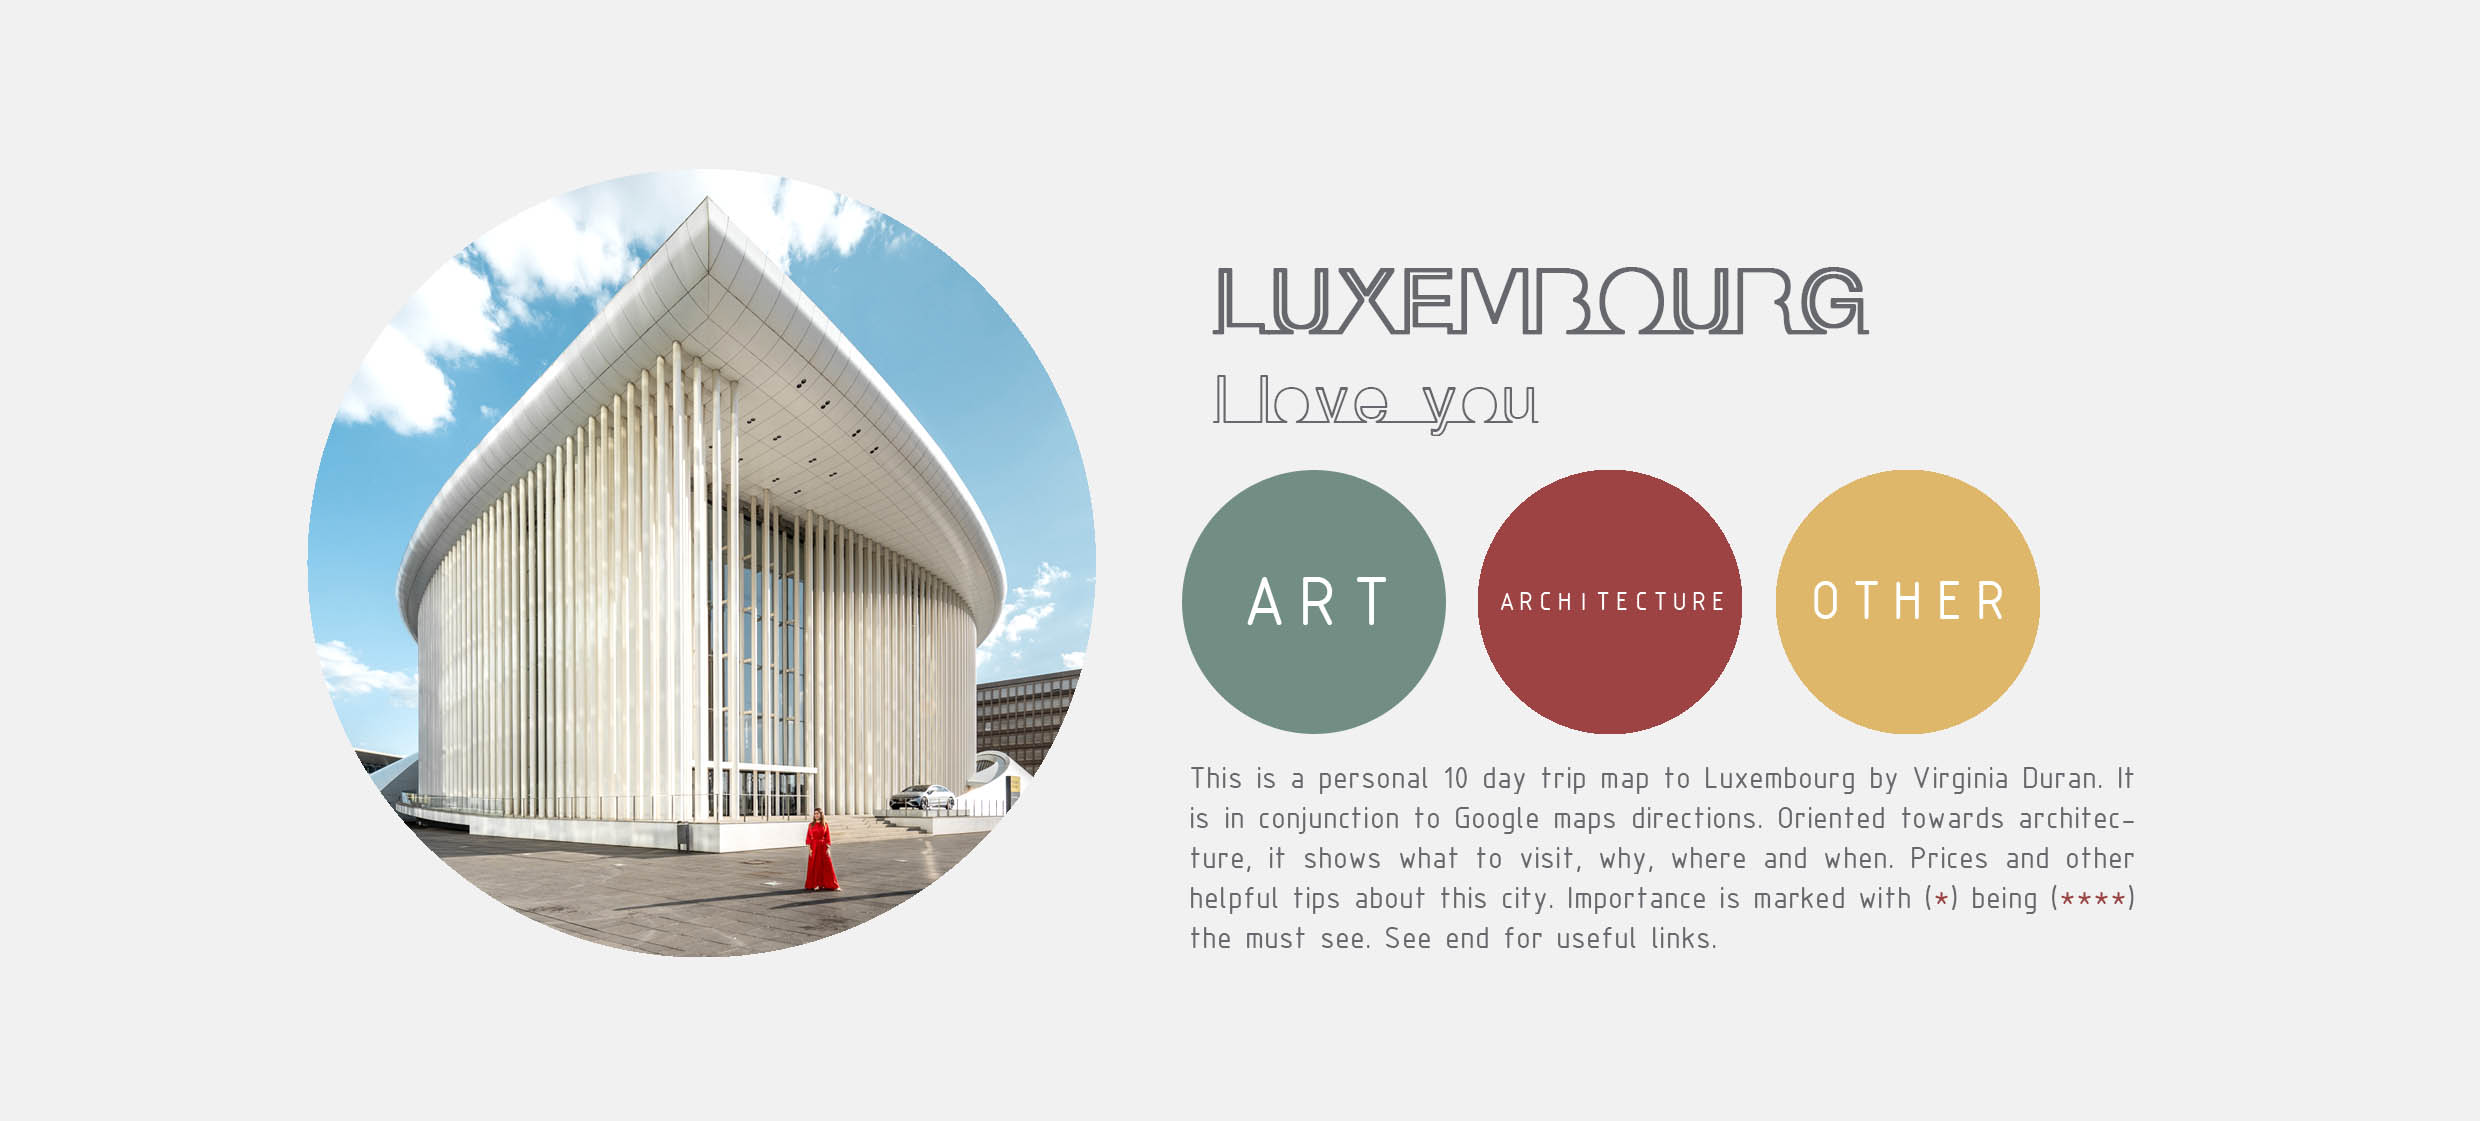 Luxembourg Architecture Guide by Virginia Duran-